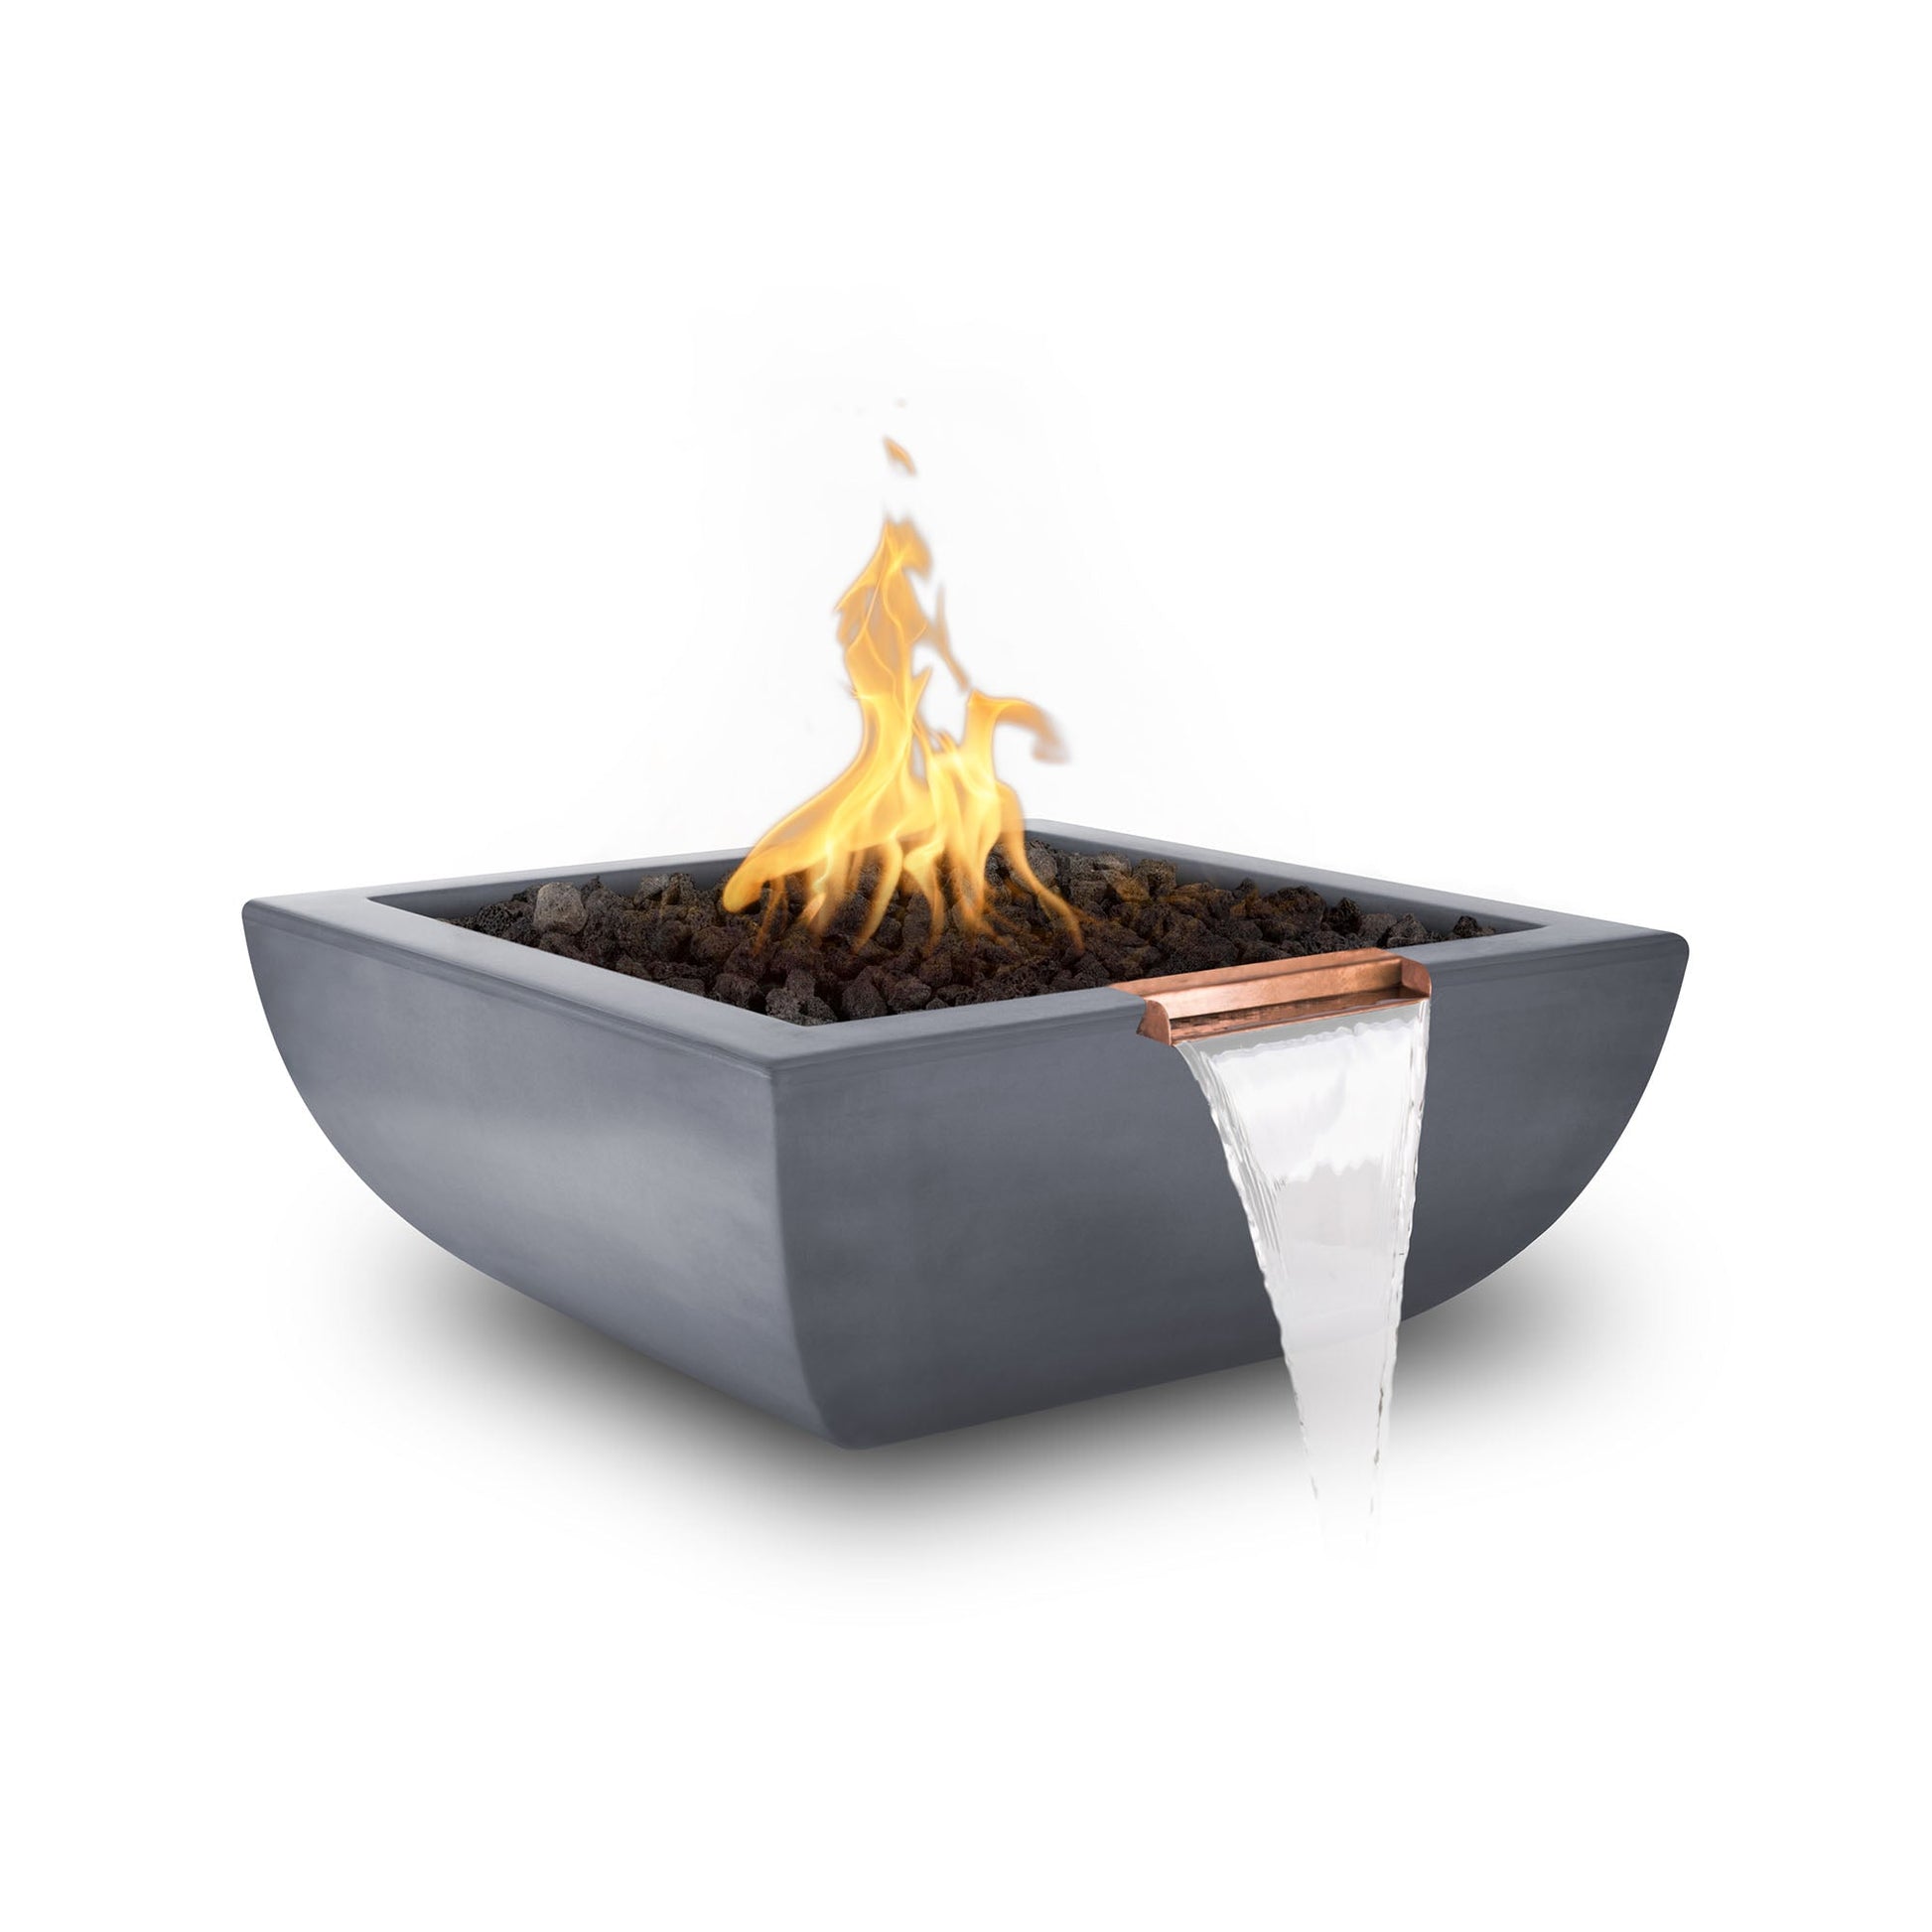 The Outdoor Plus Square Avalon 30" Chocolate GFRC Concrete Liquid Propane Fire & Water Bowl with Match Lit with Flame Sense Ignition